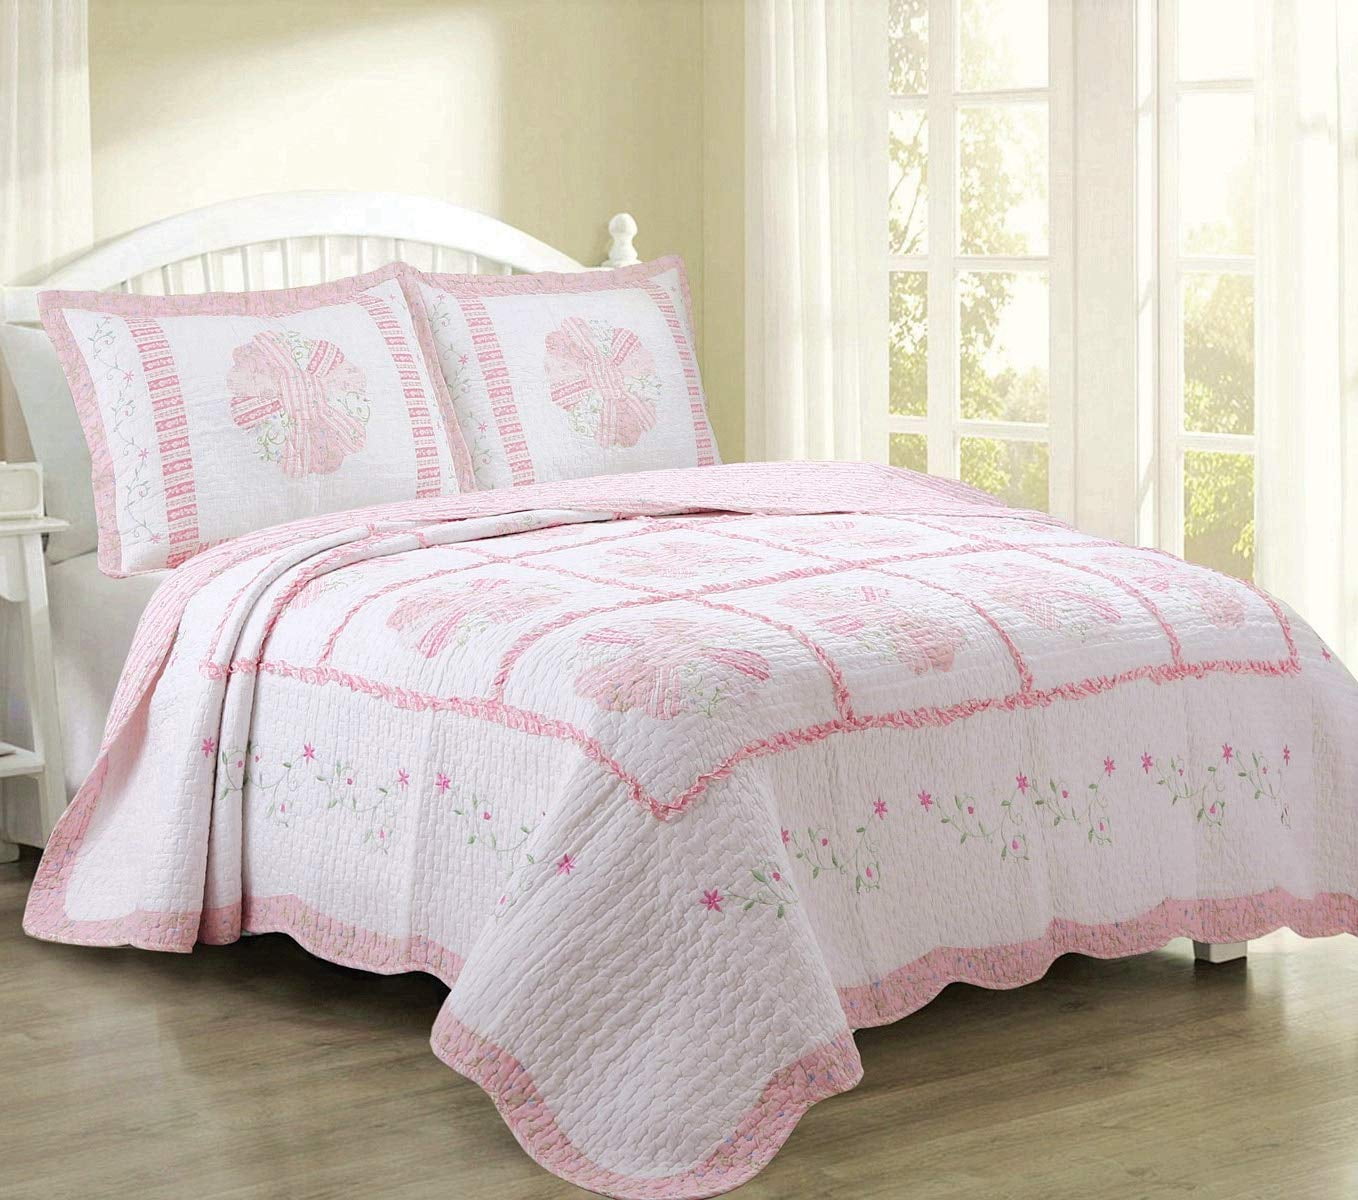 Details about   NEW ~ COZY SHABBY CHIC COUNTRY PINK RED IVORY WHITE ROSE SOFT COUNTRY QUILT SET 